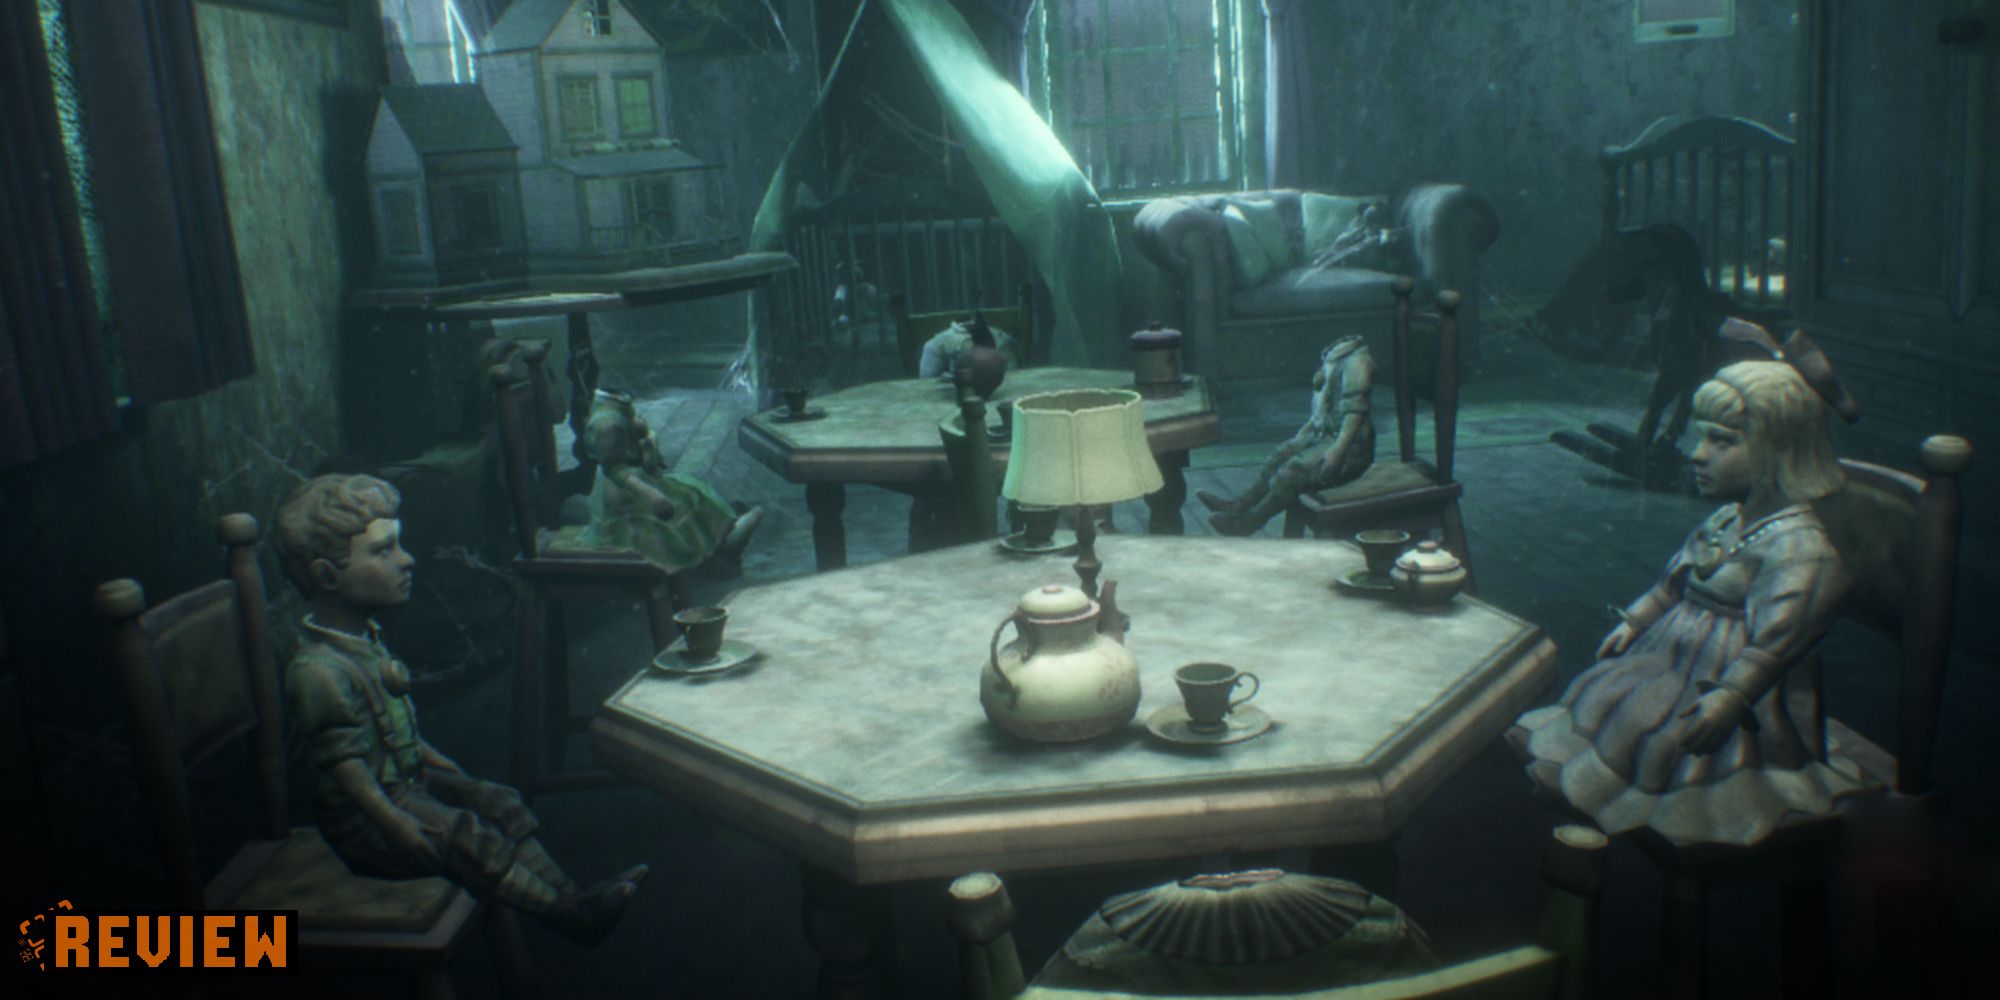 The 7th Guest VR Review Image, showing a dusty forgotten playroom with many dolls having a tea party